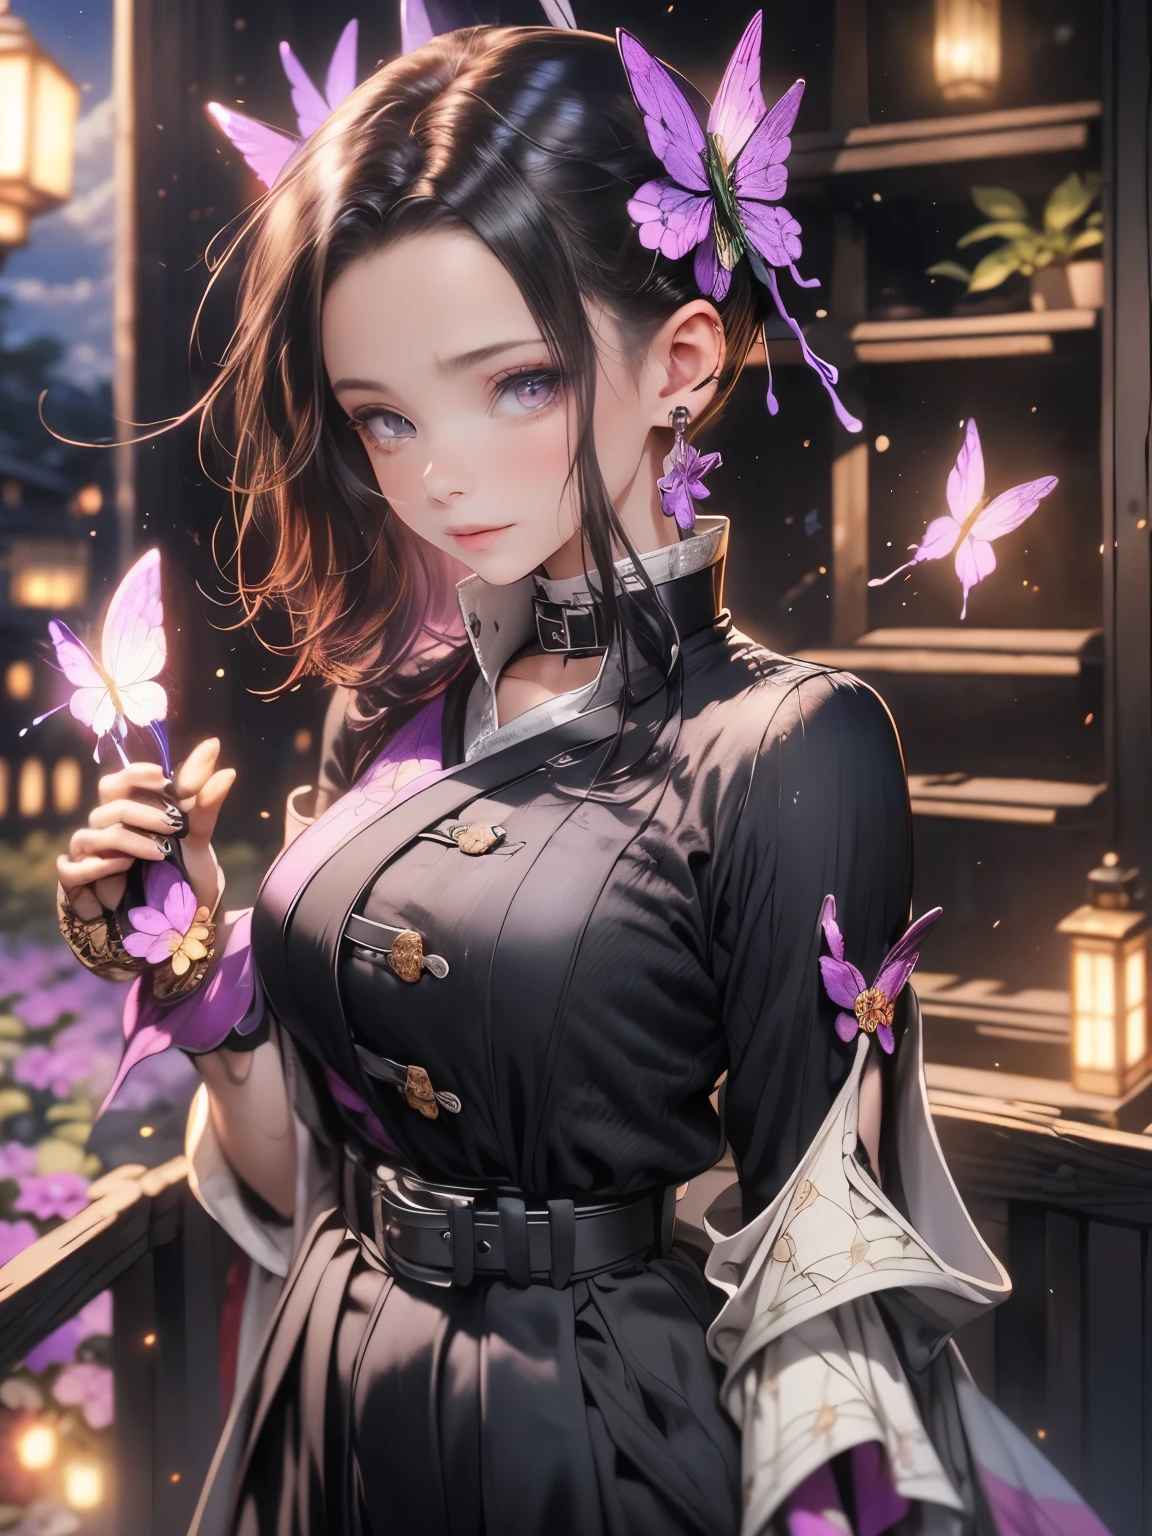 Hyper-realistic 8K CG,masterpiece,((Super detailed background, Exquisite pattern, intricate details)),best quality,very detailed Face,extremely detailed eyes and Face,extremely detailed eyes,Section Chief Ren,colorful hair,no bangs,hair intake,purple eyes,forehead,black shirt,Black pants,Haori,Butterfly,buttons,belt,(garden:1.2),purple flower,chibi,cloudy Sky,Sunlight,Tyndall effect,slope_Sky,Face,Gorgeous Sky,waist knife,Charming gesture, Hyper-realistic 8K CG, masterpiece, close up, (weapons in hand: 1.2), (attack: 1.2), beauty, goddess, from the front, Face sticking out, (Super detailed background, Exquisite pattern, intricate details)), high quality, highly detailed Face, highly detailed eyes and Face, highly detailed eyes, Fluttershy Ninja, colorful hair, no bangs, hair intake, purple eyes, forehead, black shirt, Black pants, (Haori, Butterfly: 1.3, button, belt), (garden: 1.2), purple flower, chibi, cloudy Sky, Sunlight, Tyndall effect, slope_Sky, Face, gorgeous Sky, Waist saber,